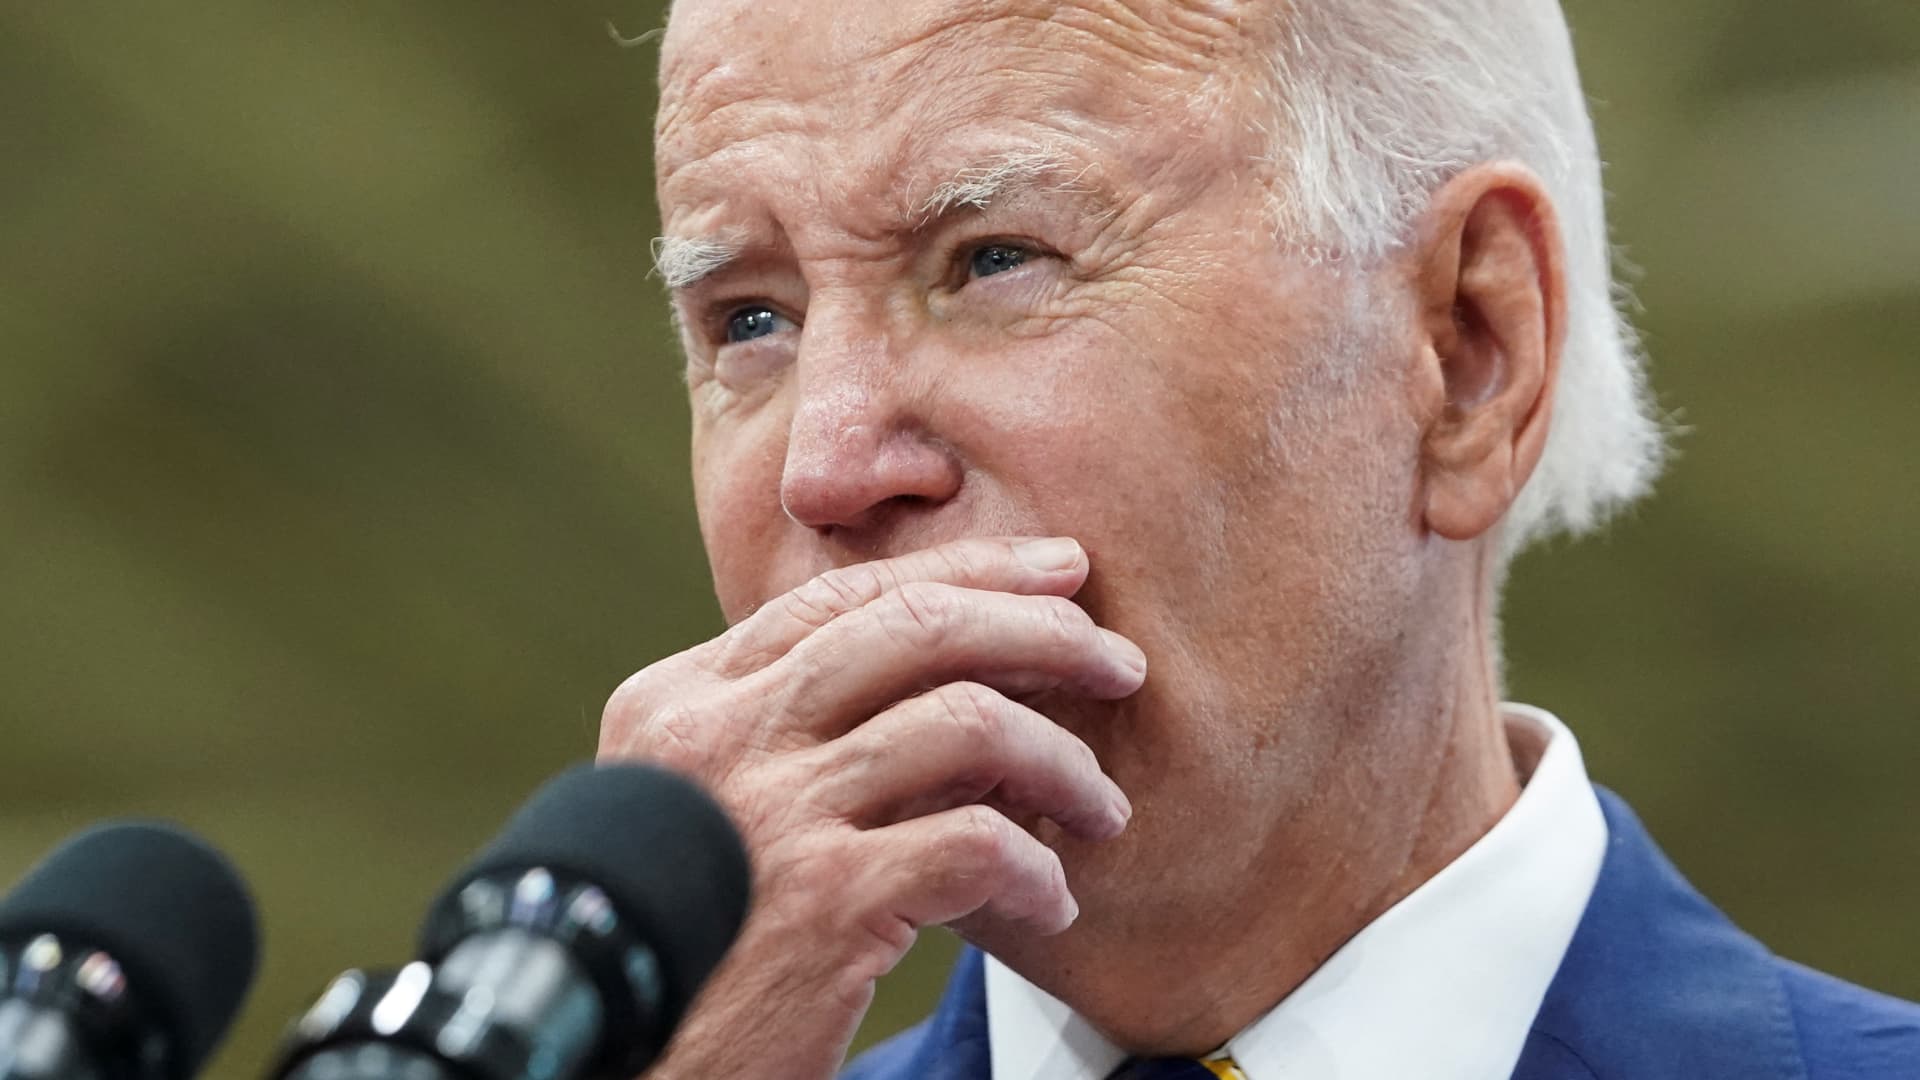 The Biden administration bet big on industrial insurance policies. Experts warn it may not pay off